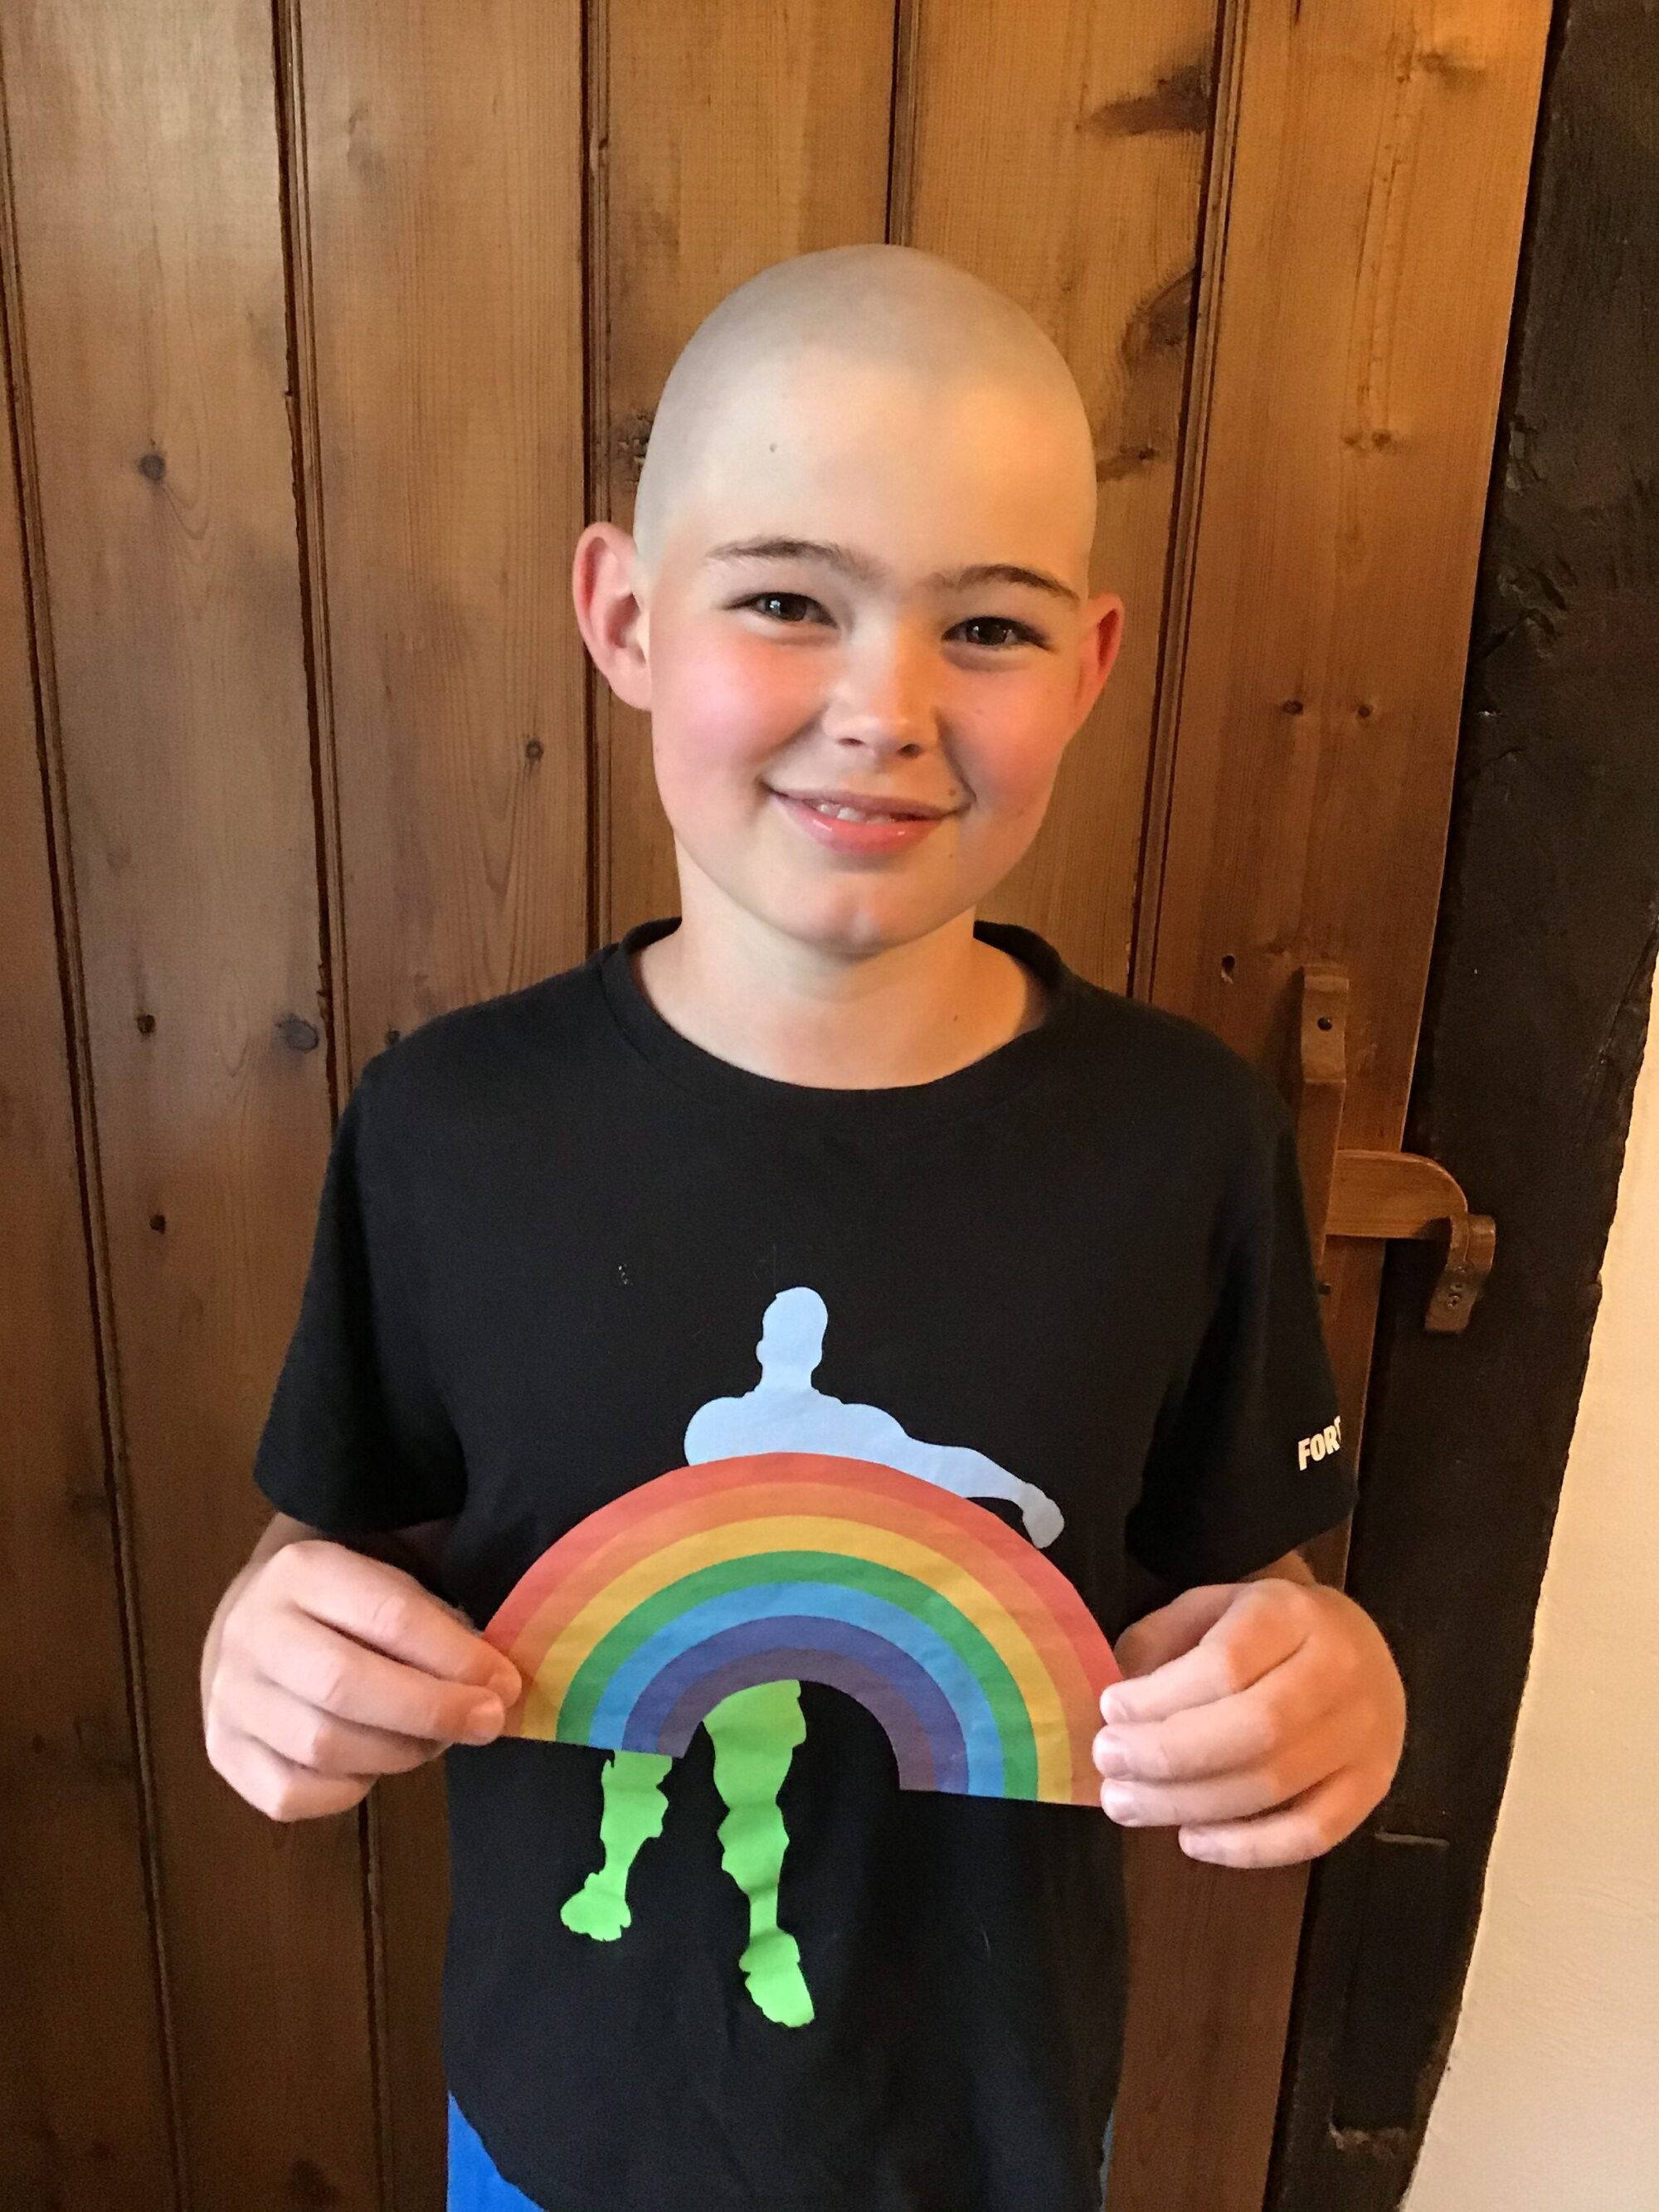 George smiling proudly after his head shave